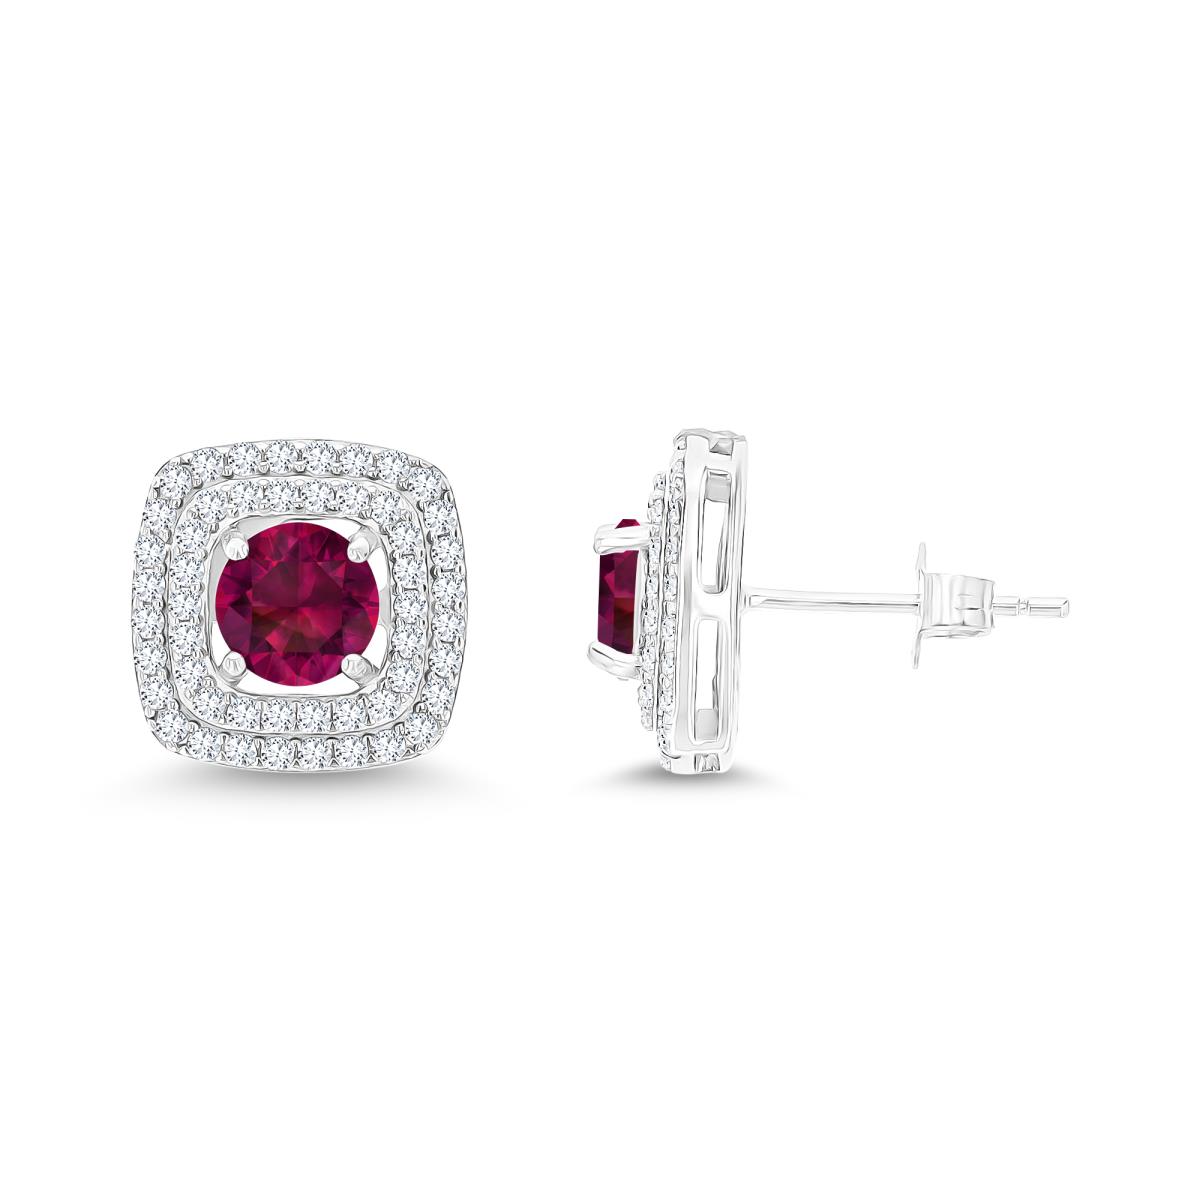 Sterling Silver Rhodium 6mm RD Cr Ruby/ Cr White Sapphire Cushion Double Halo Stud Earring